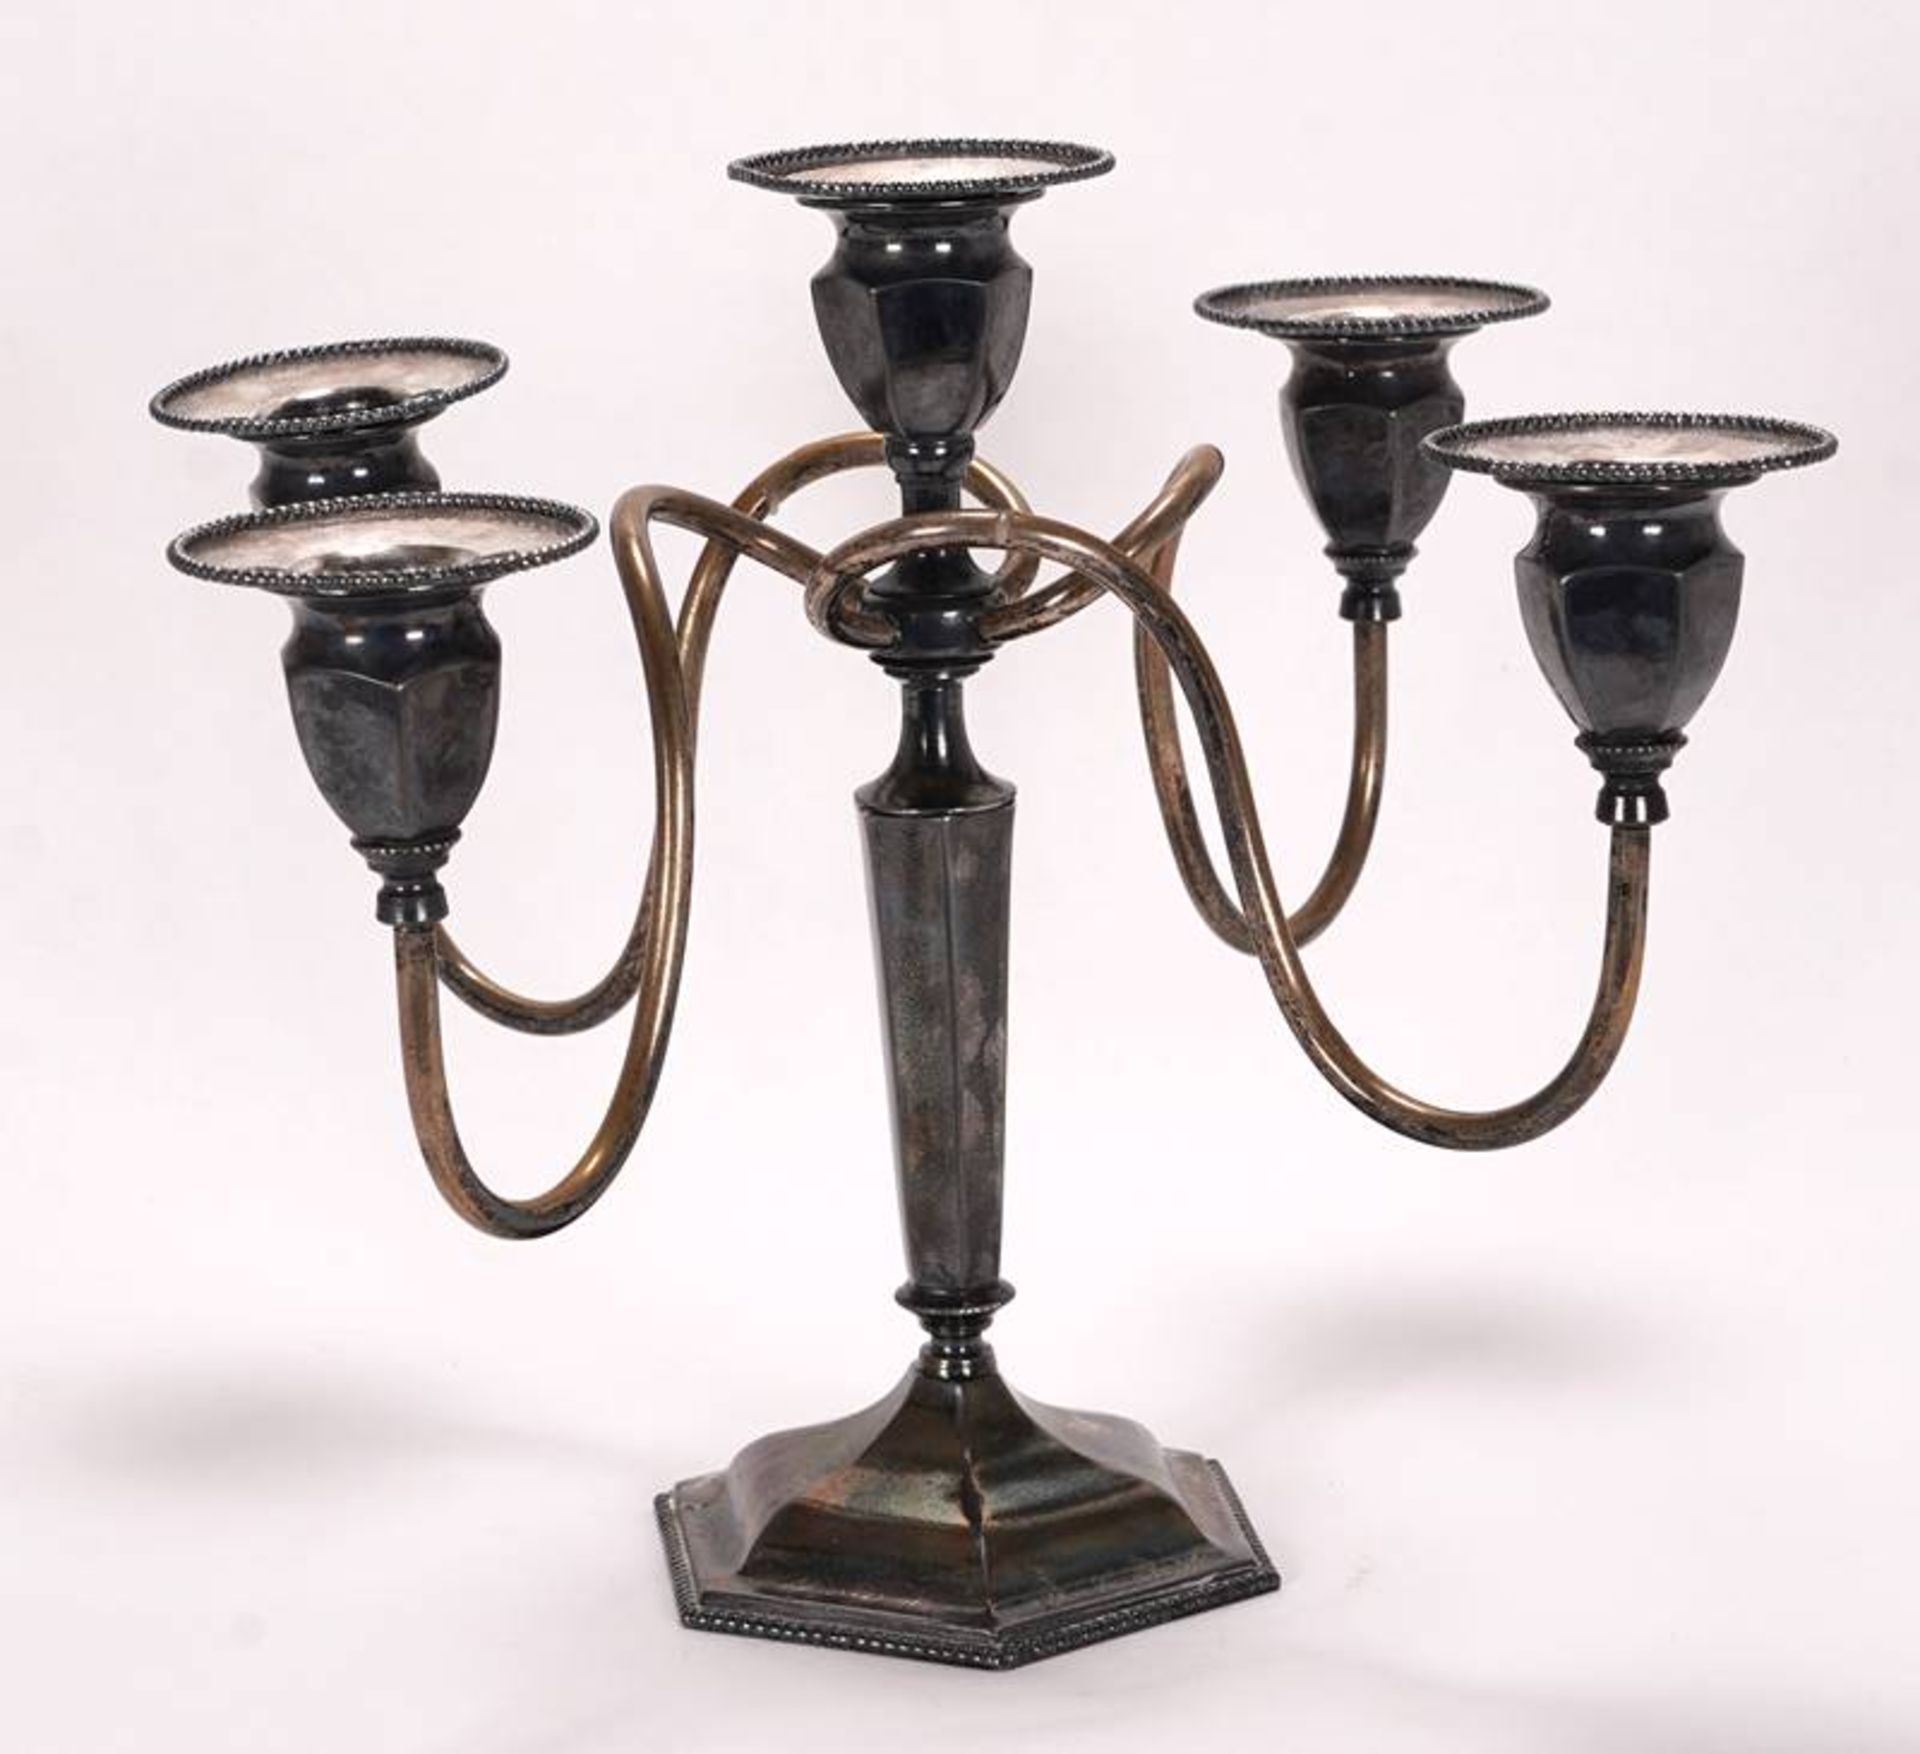 Candlestick - Image 2 of 5